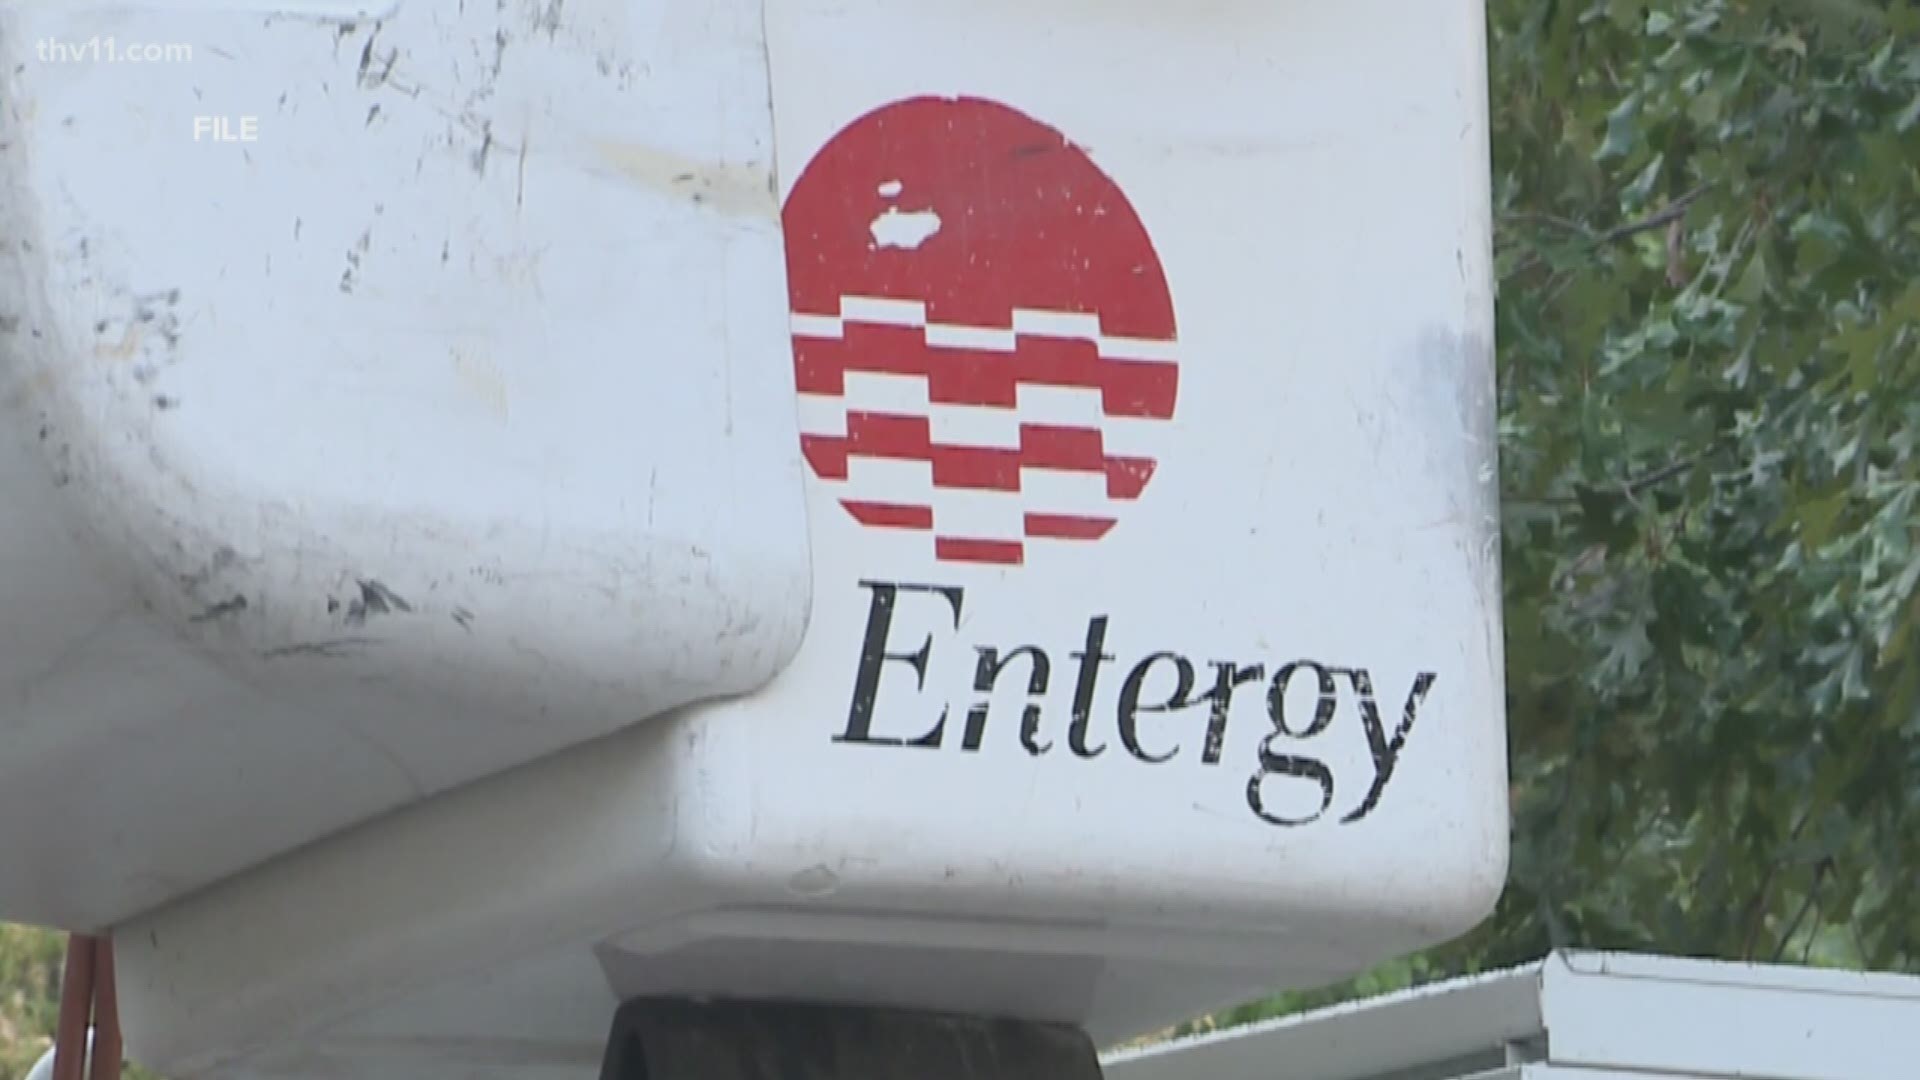 Entergy officials say they plan to have all power restored by Wednesday.